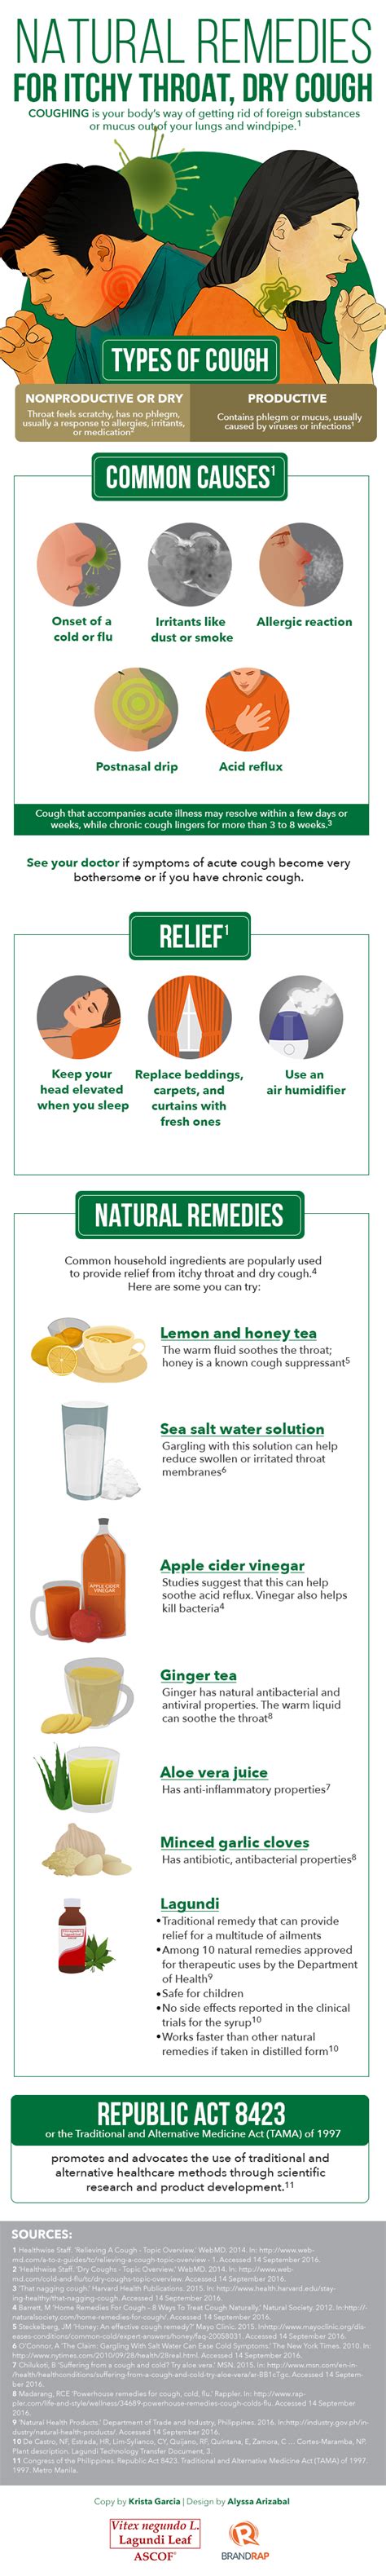 Home remedies for cough can easily exist within your own home, so there is no need to resort to pharmacy or doctor visits. Natural remedies for itchy throat, dry cough